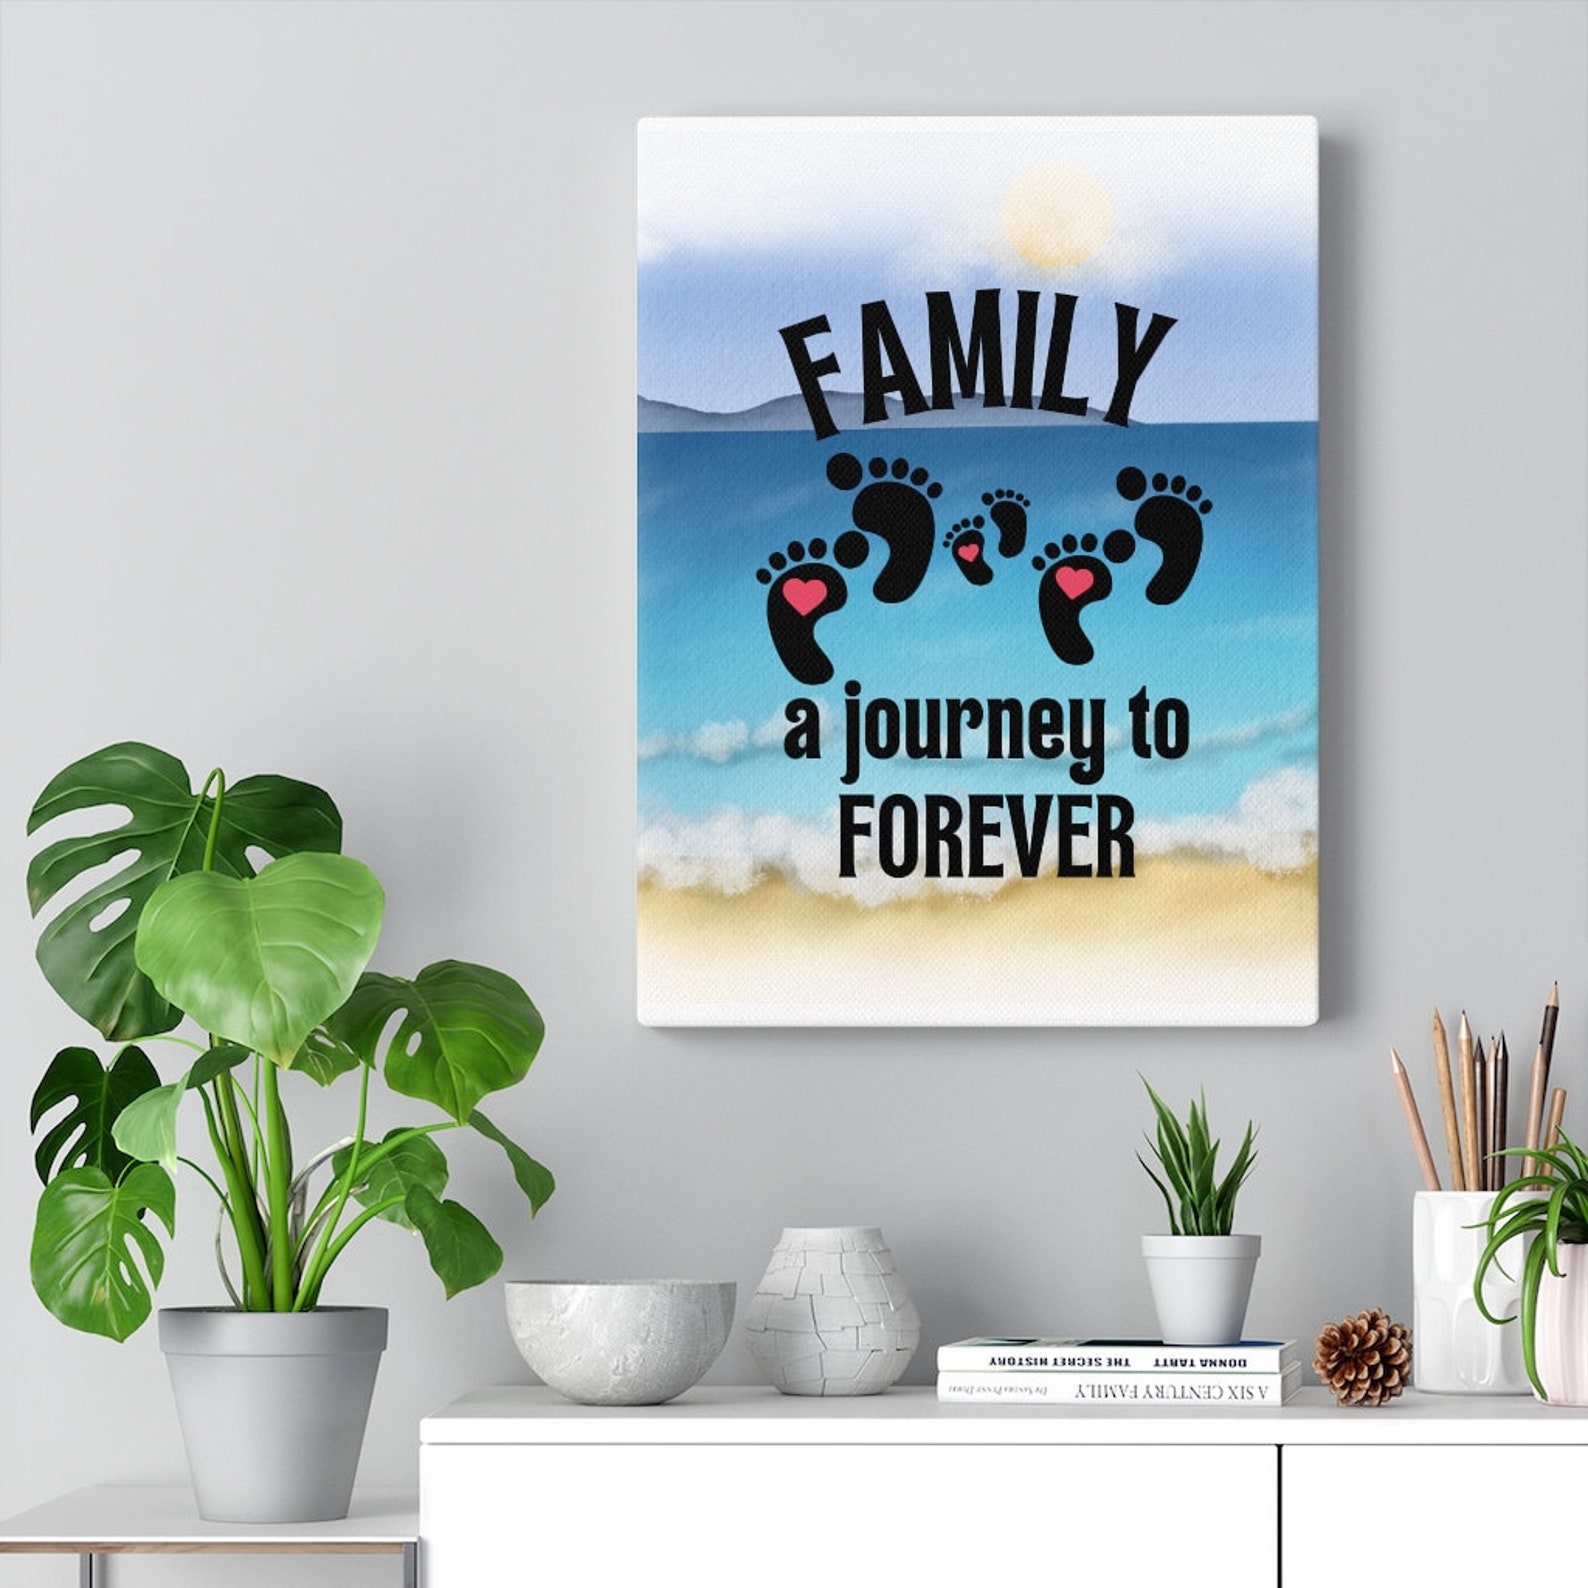 family a journey to forever web series online